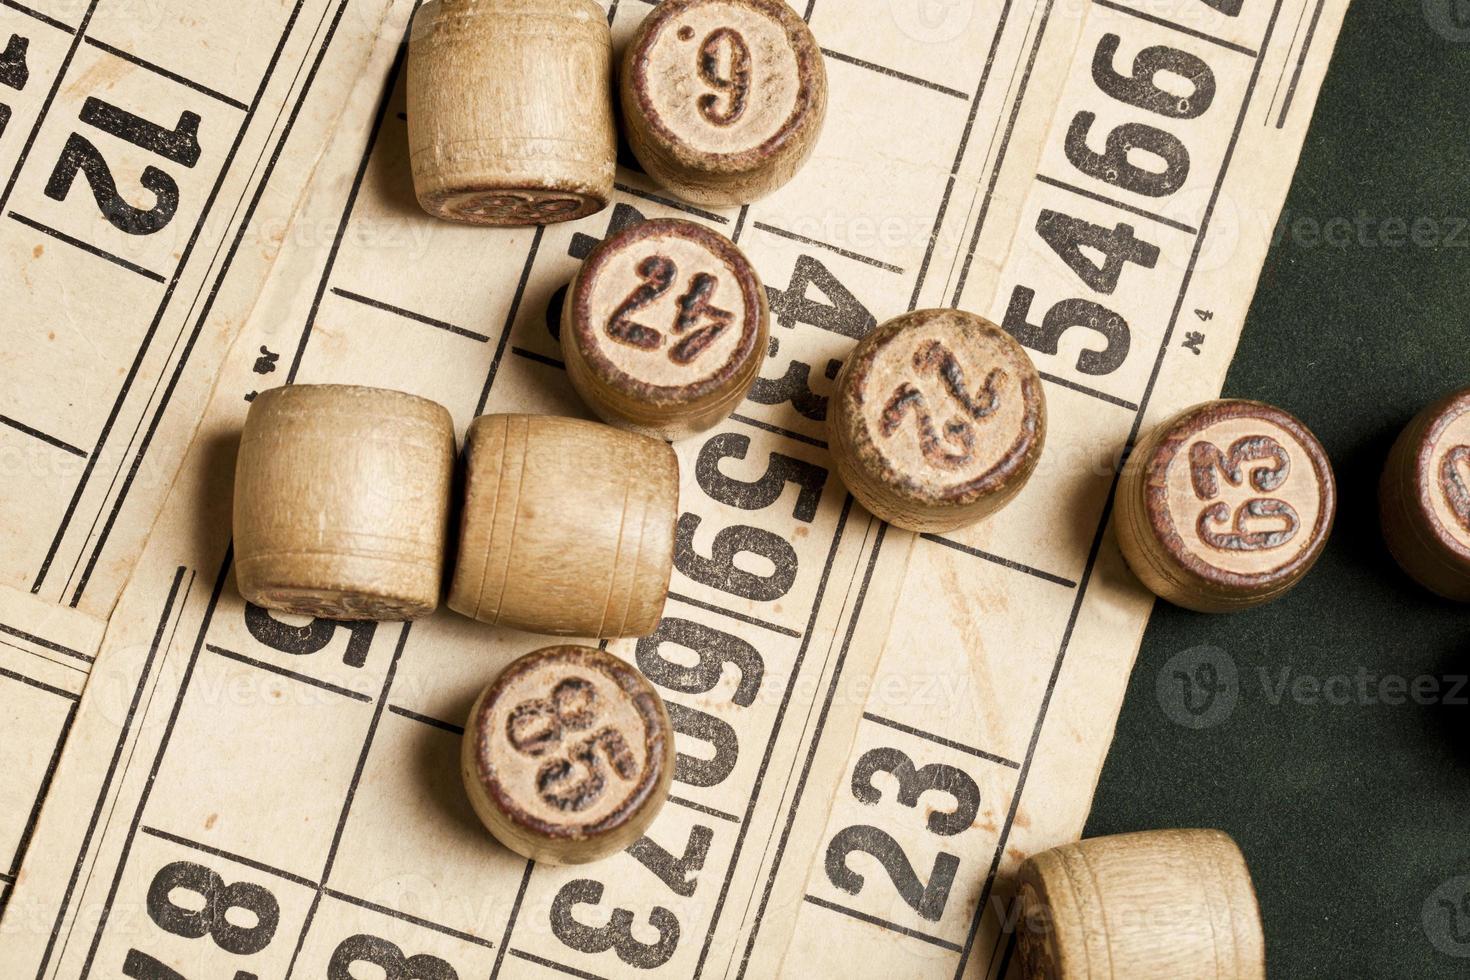 Table game Bingo. Wooden Lotto barrels with bag, playing cards for Lotto games, games for family. photo